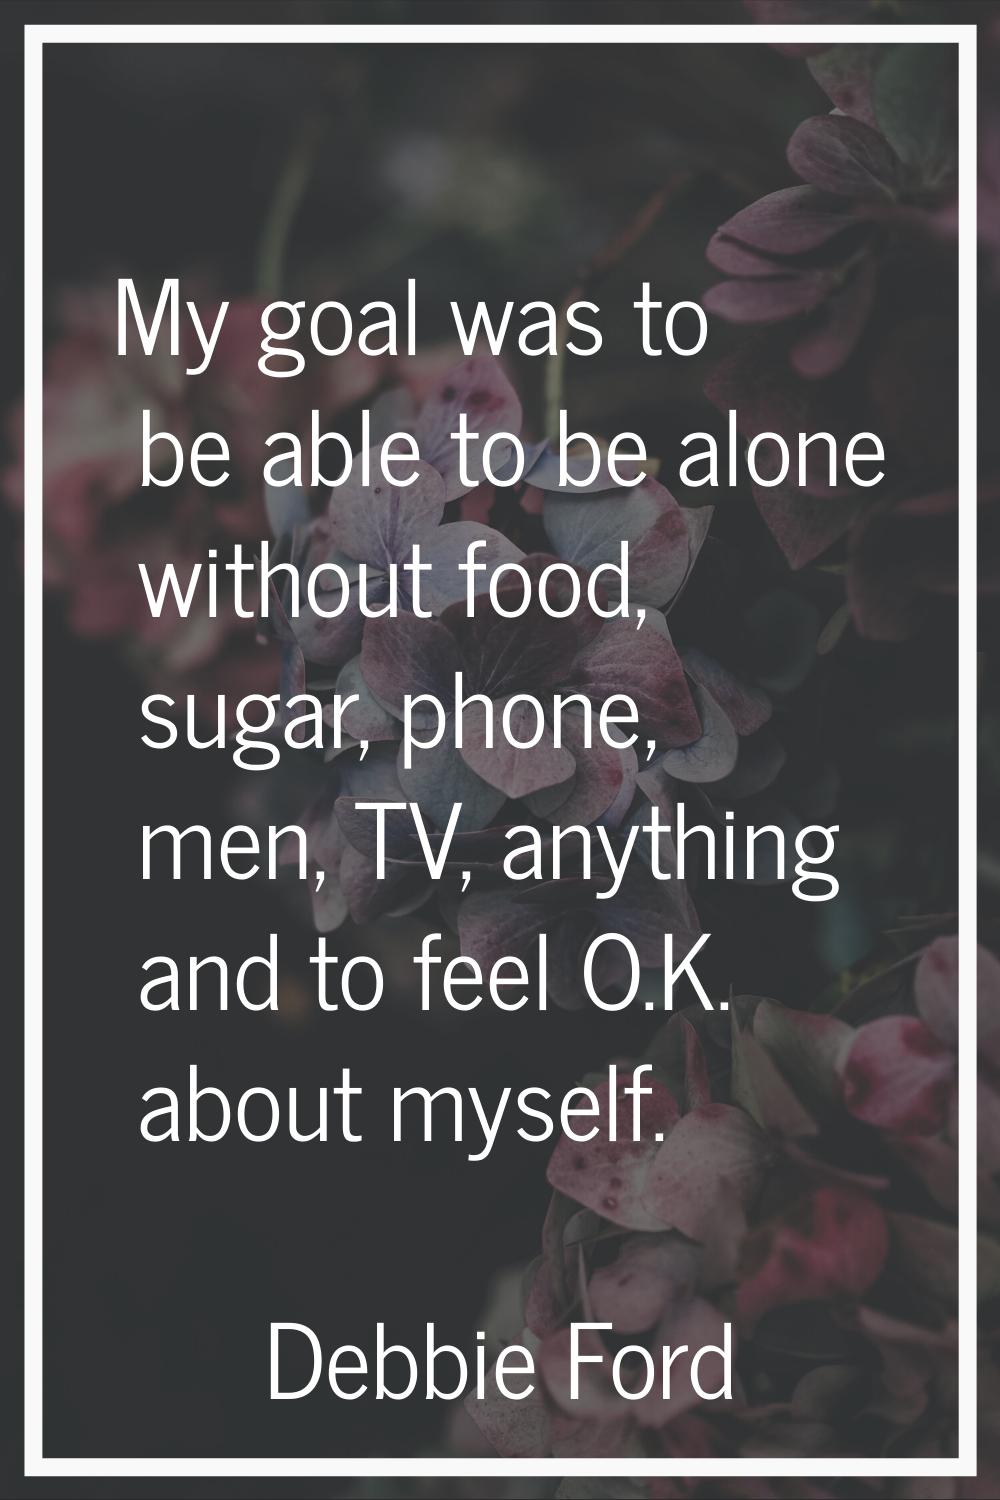 My goal was to be able to be alone without food, sugar, phone, men, TV, anything and to feel O.K. a